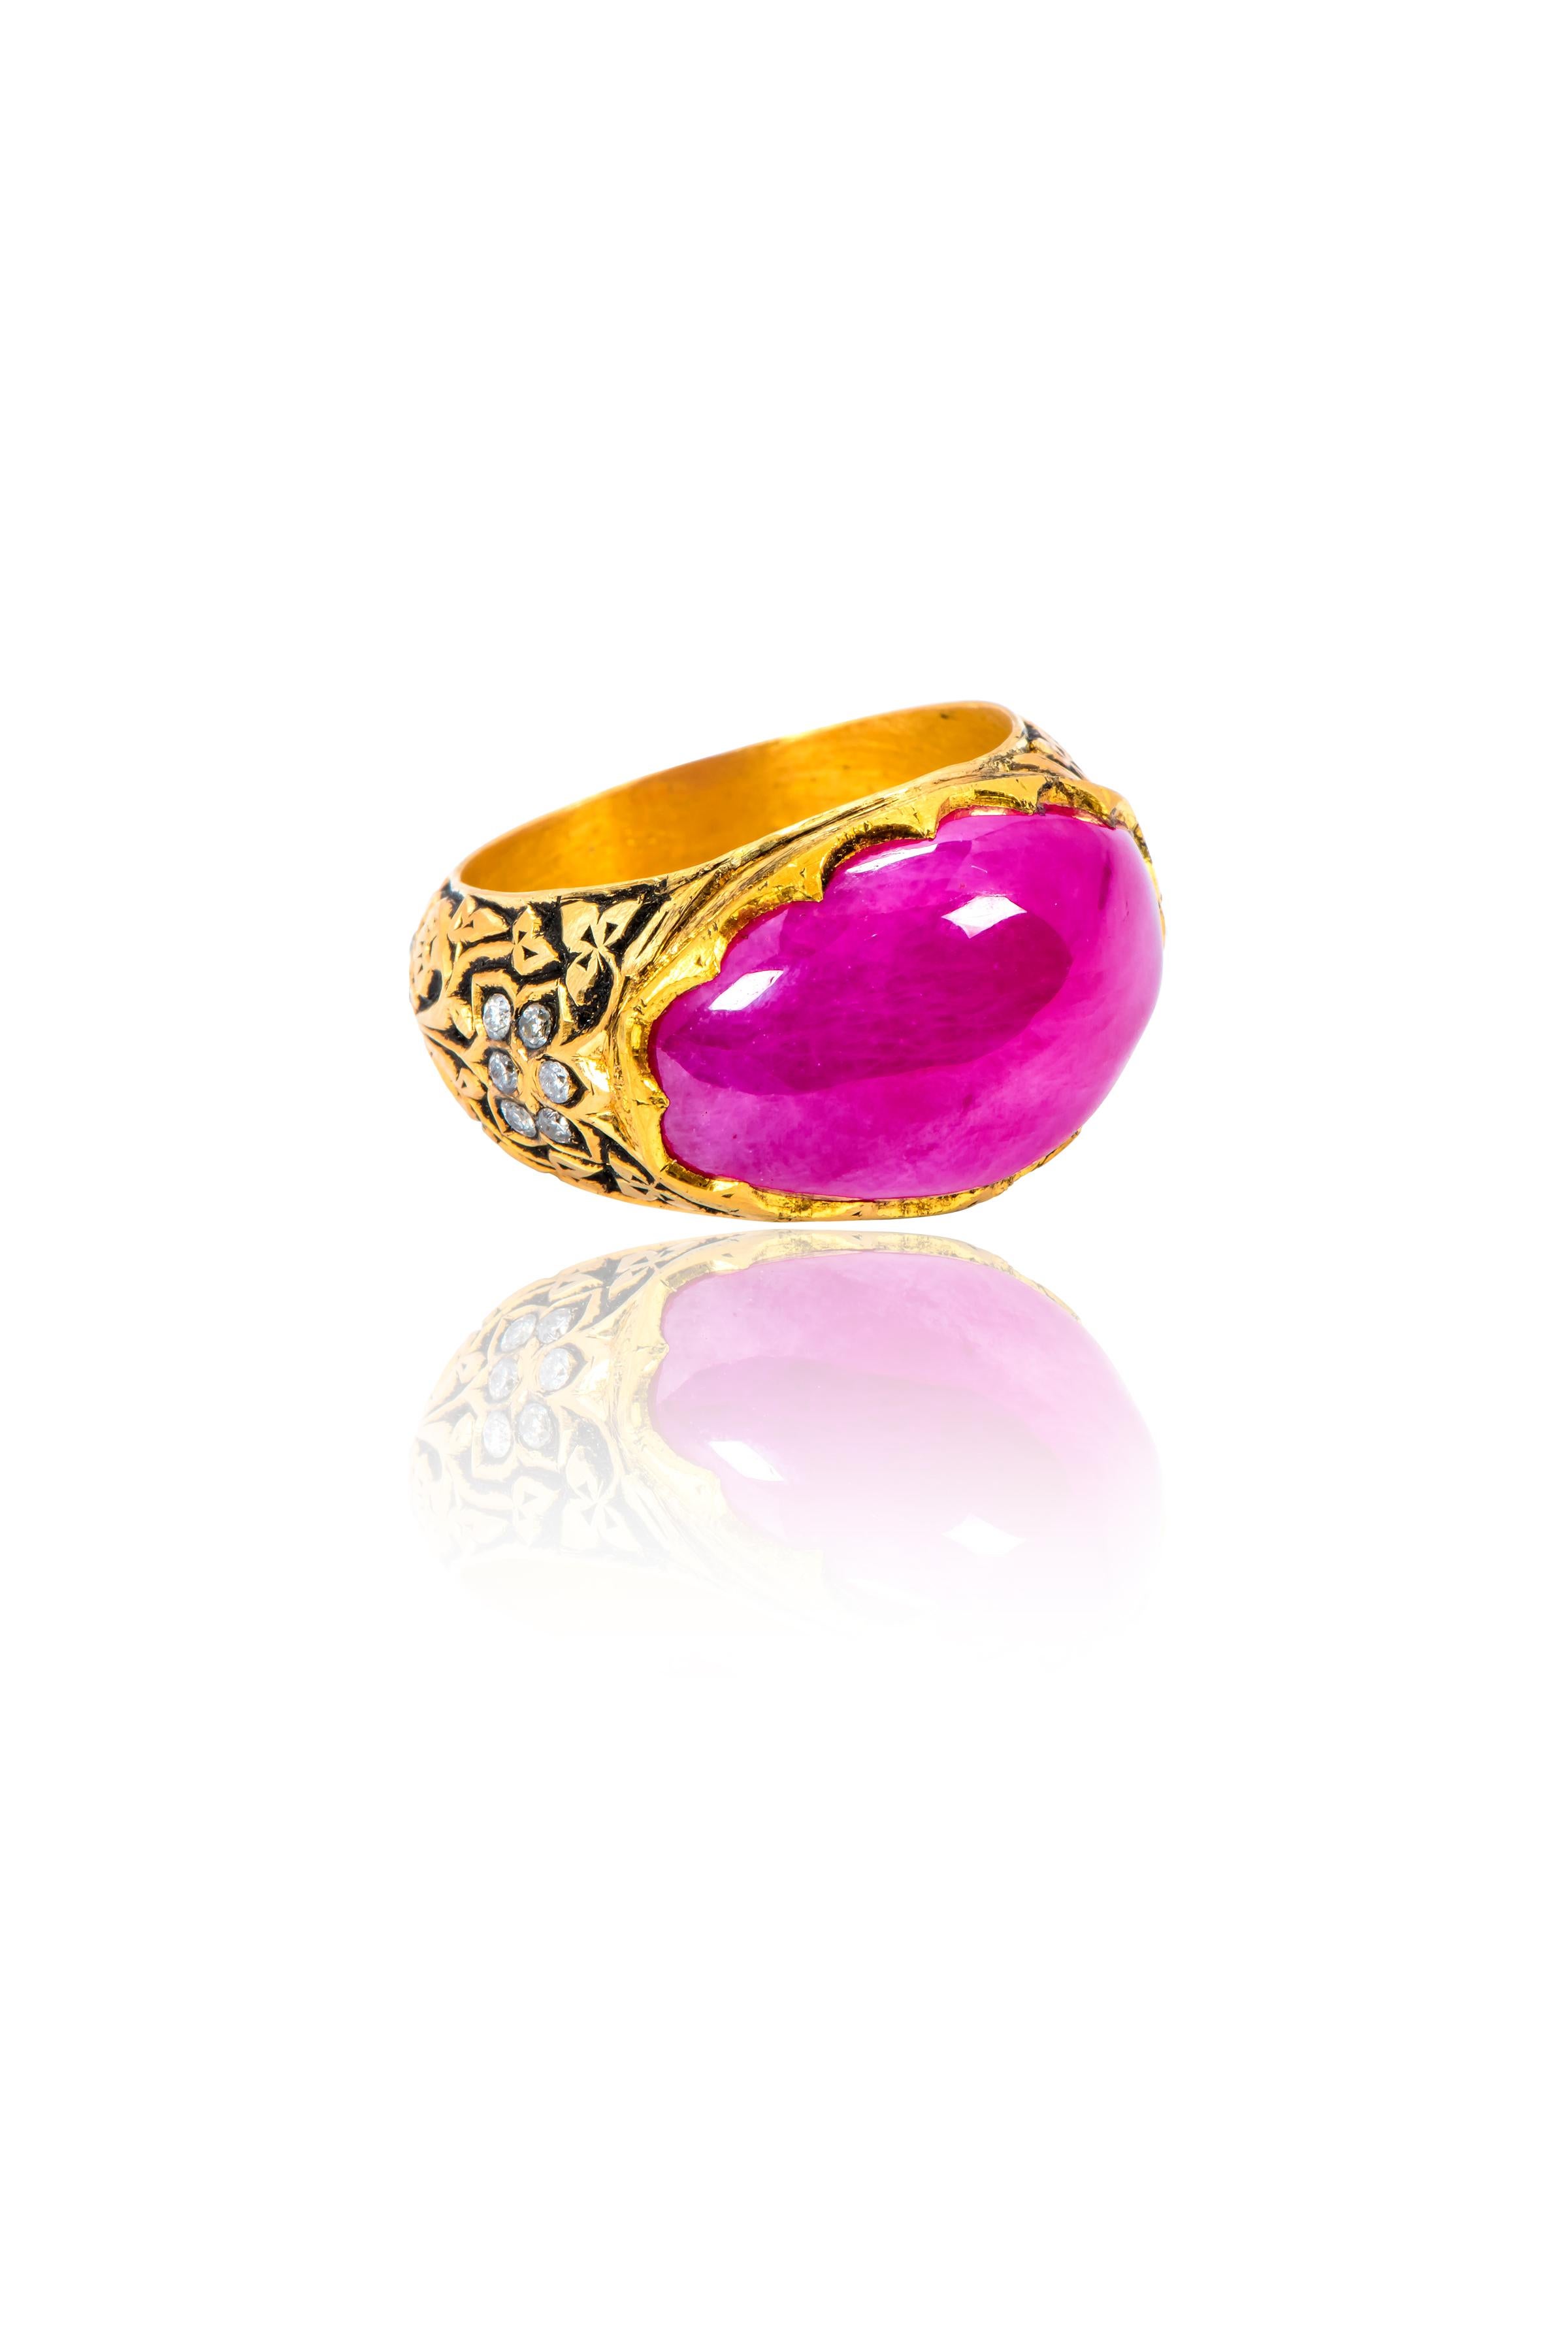  22 Karat Yellow Gold 14.85 Carat Cabochon Ruby Diamond Ring

The stately solitaire ruby oval domed cabochon is brilliantly juxtaposed by the vivid definements in the 22k goldwork. The handcrafted minute detailing on the band with Polki diamonds